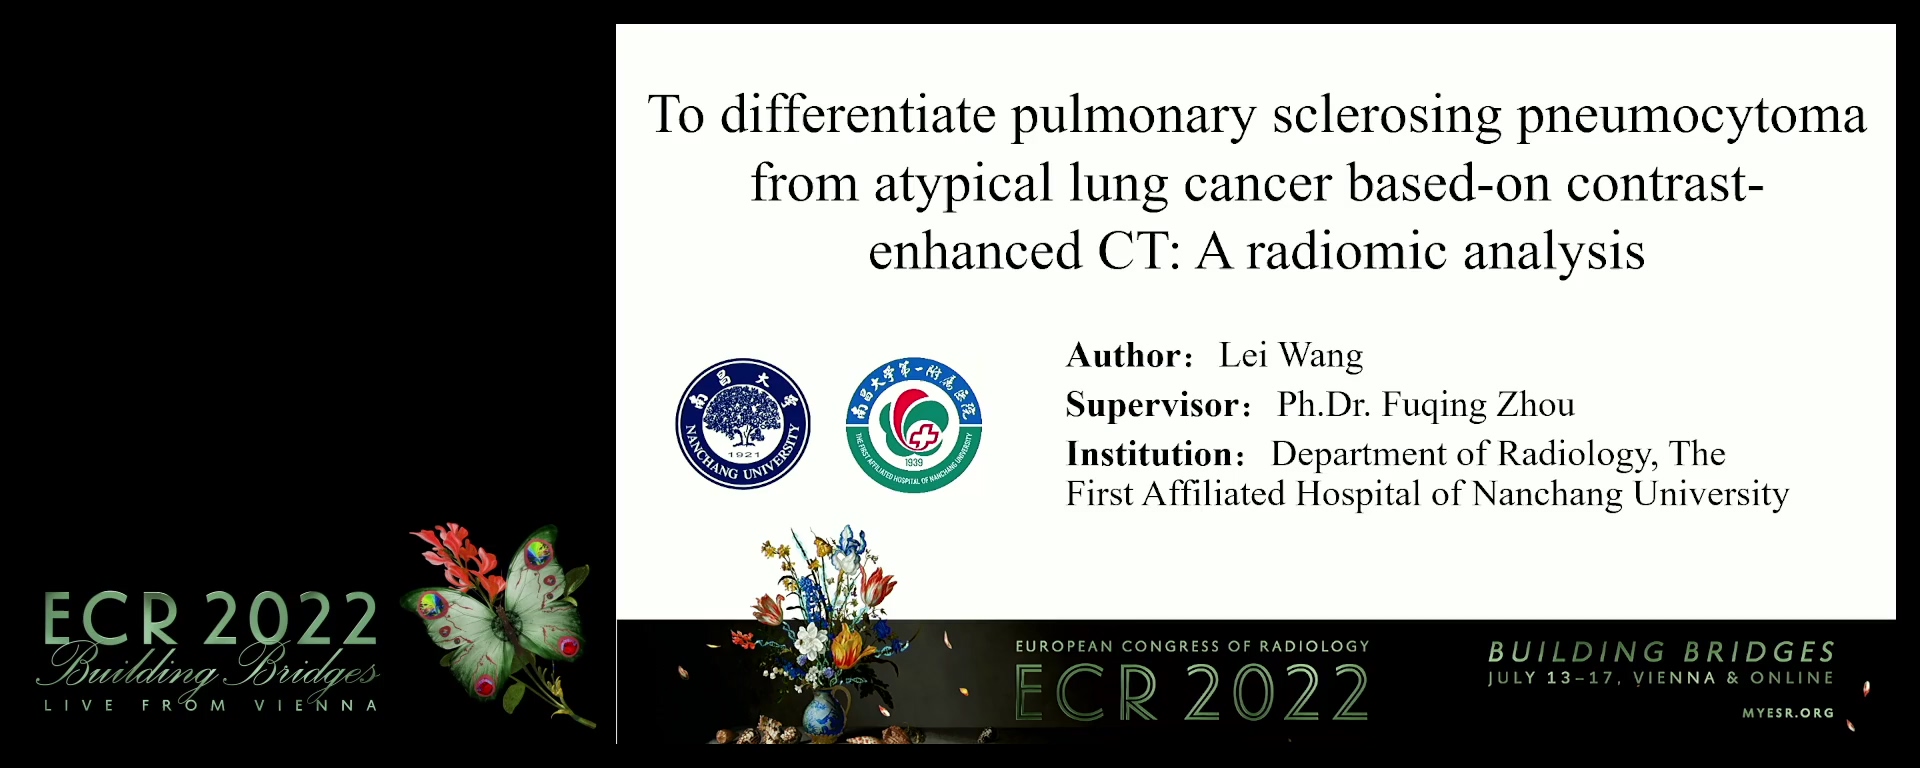 To differentiate pulmonary sclerosing pneumocytoma from atypical lung cancer based-on contrast-enhanced CT: a radiomic analysis - Lei Wang, Nanchang / CN